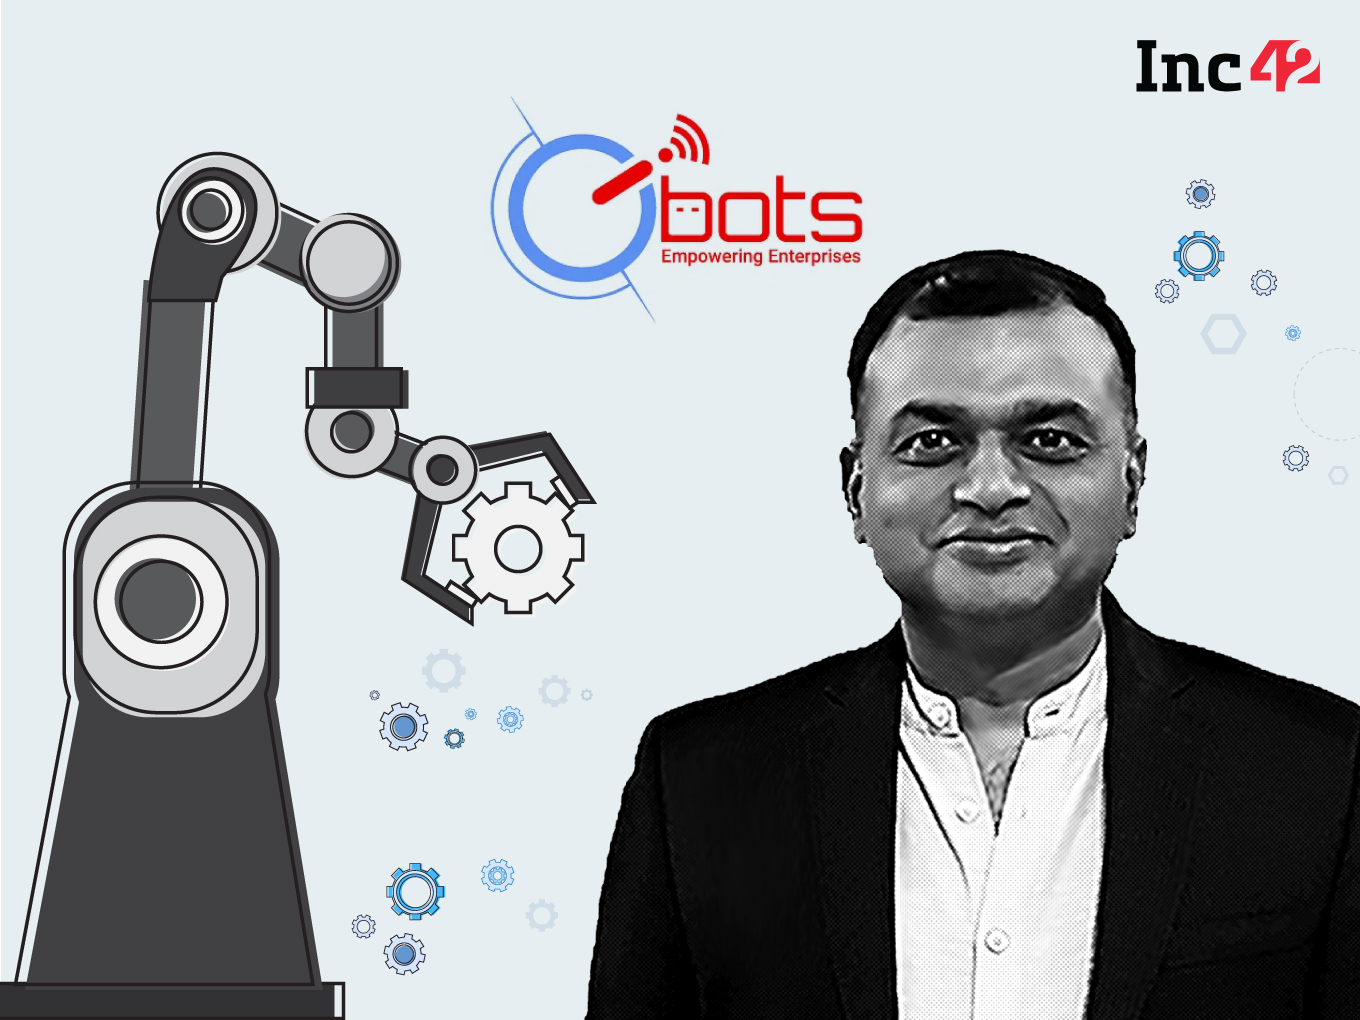 How GIBots Is Democratising Digital Transformation For India Inc